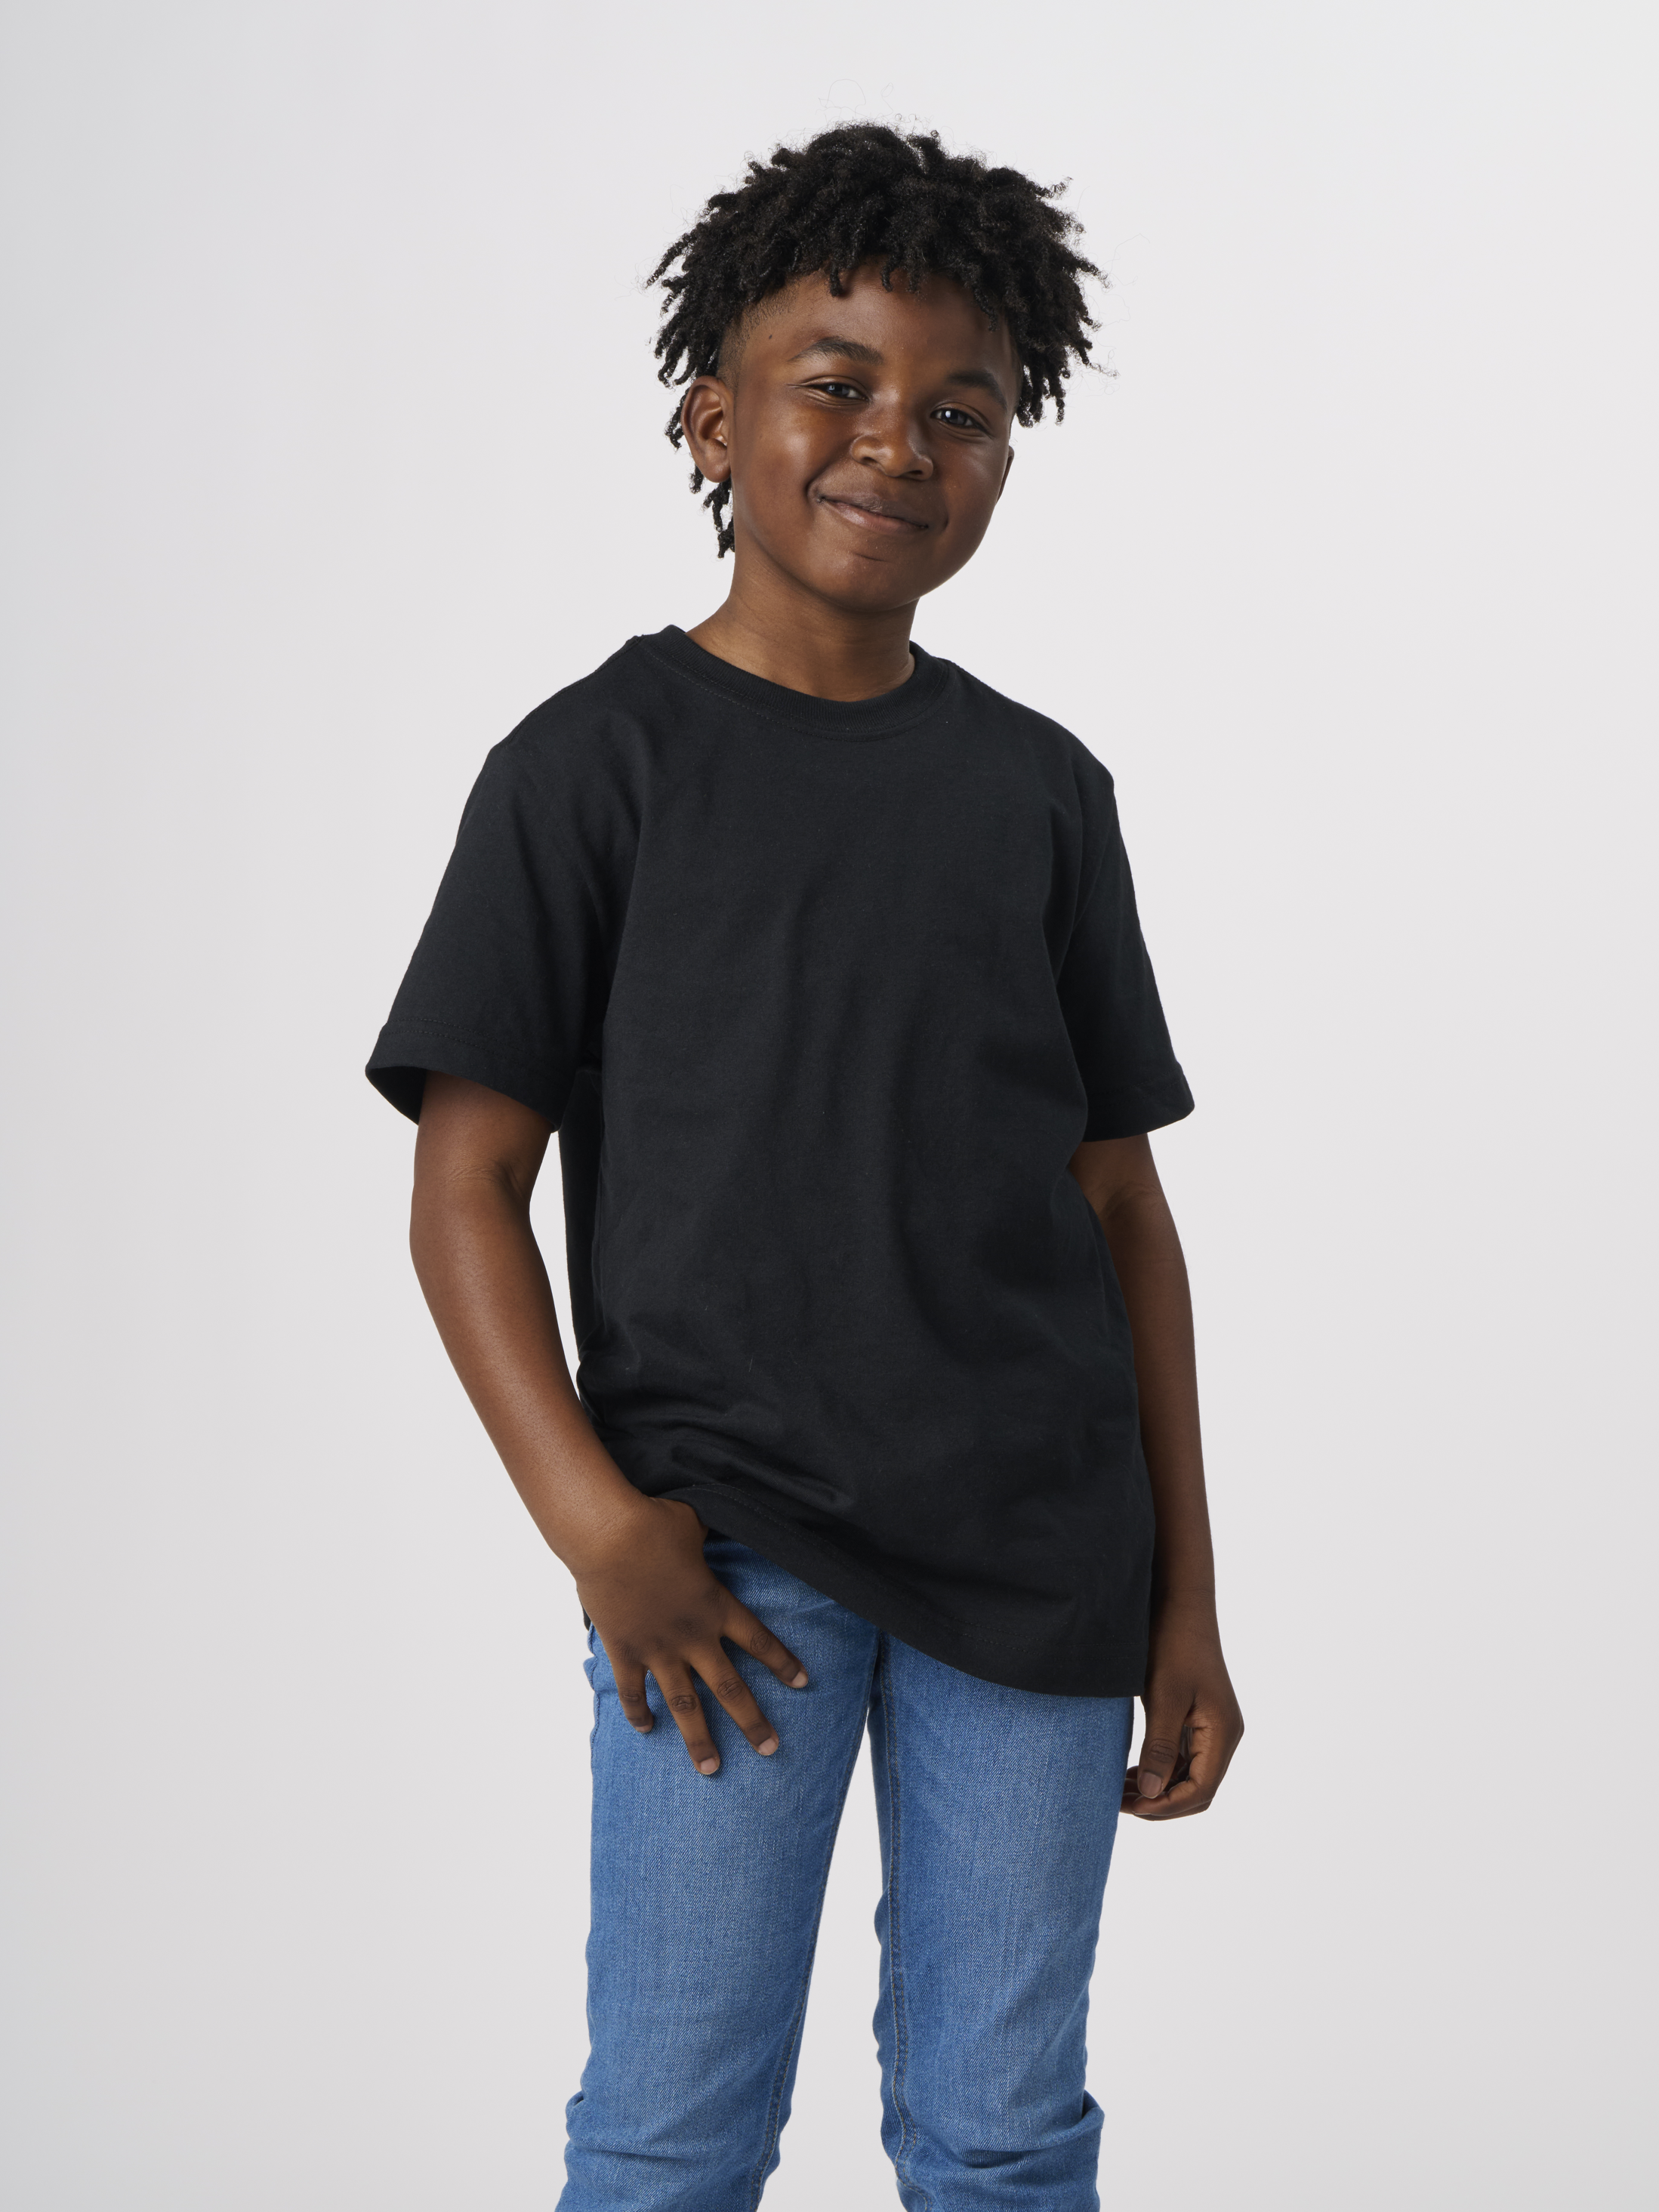 RECOVER_EY100_ECOYOUTHSHORTSLEEVETSHIRT_BLACK_FRONT.png